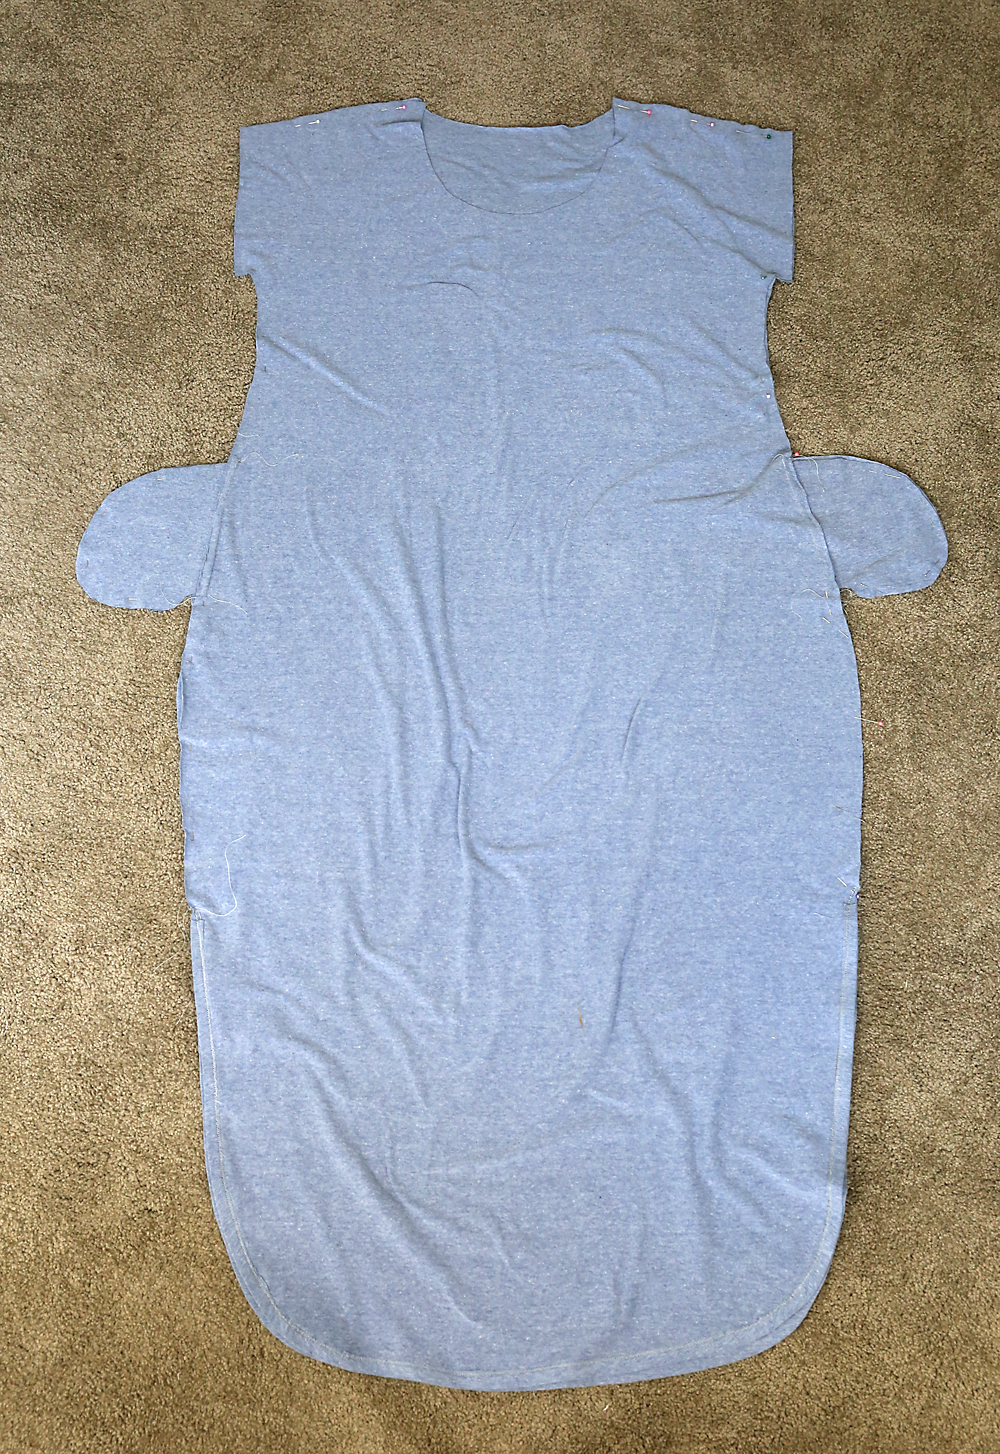 Maxi dress front piece with pockets attached